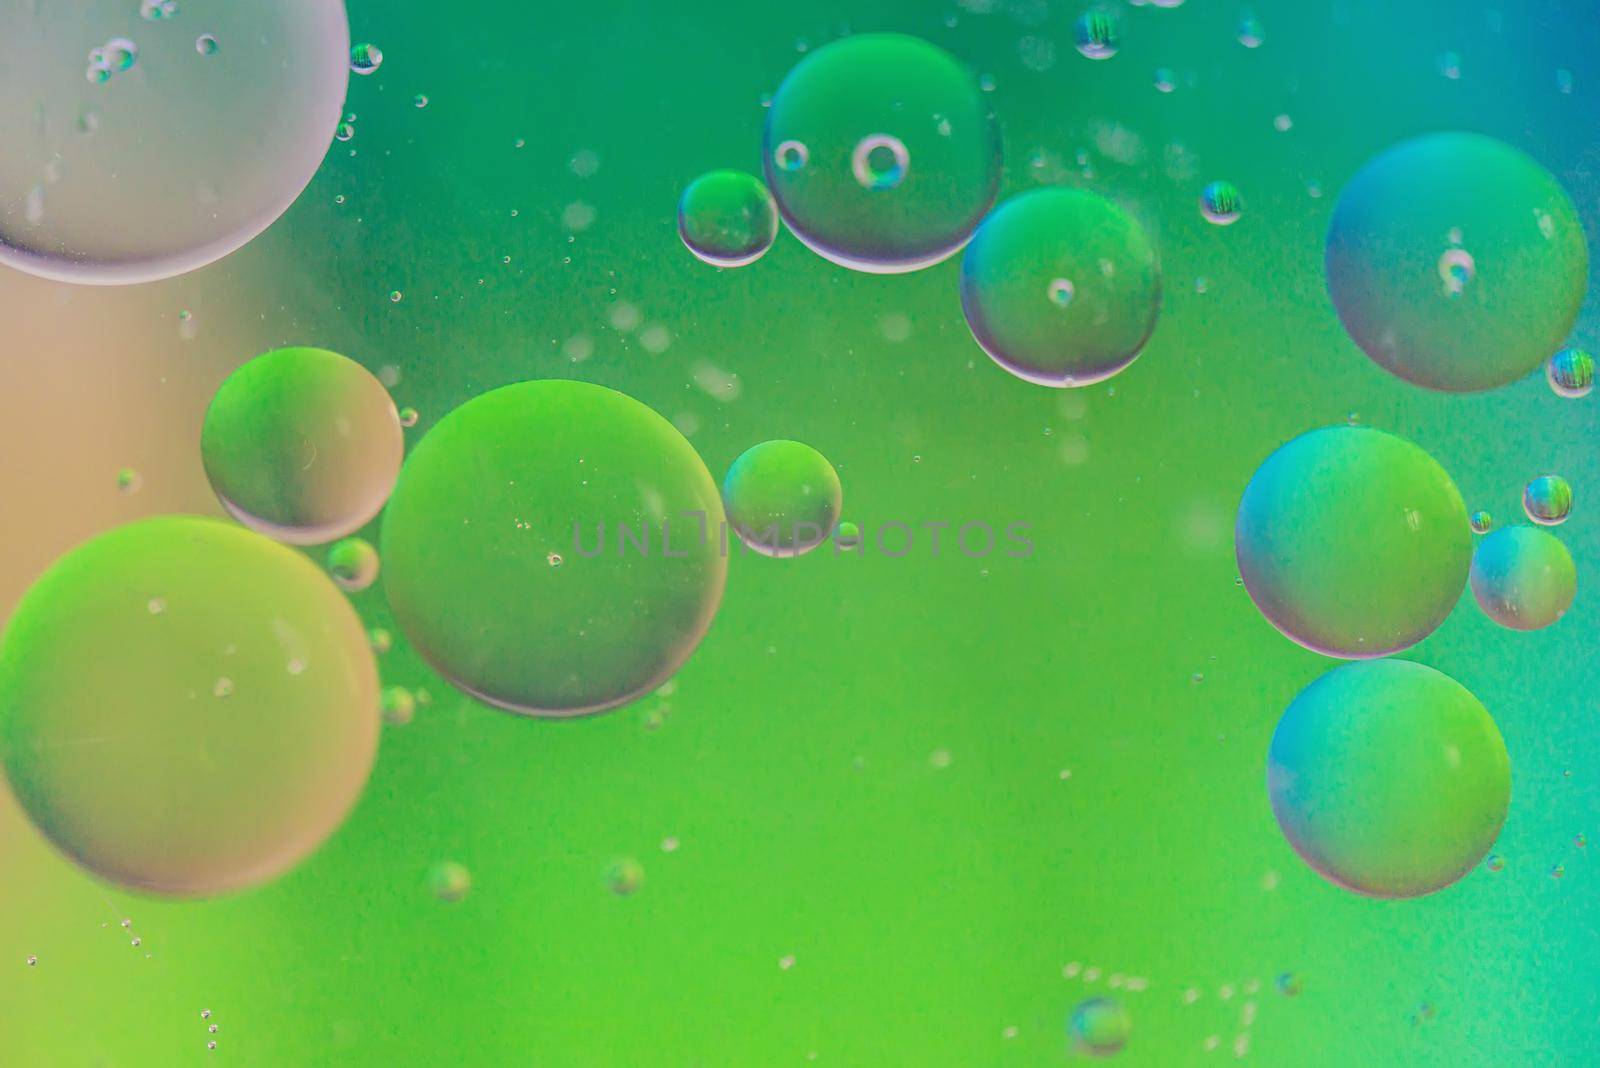 Oil drops in water. Abstract defocused psychedelic pattern image rainbow colored. Abstract background with colorful gradient colors. DOF